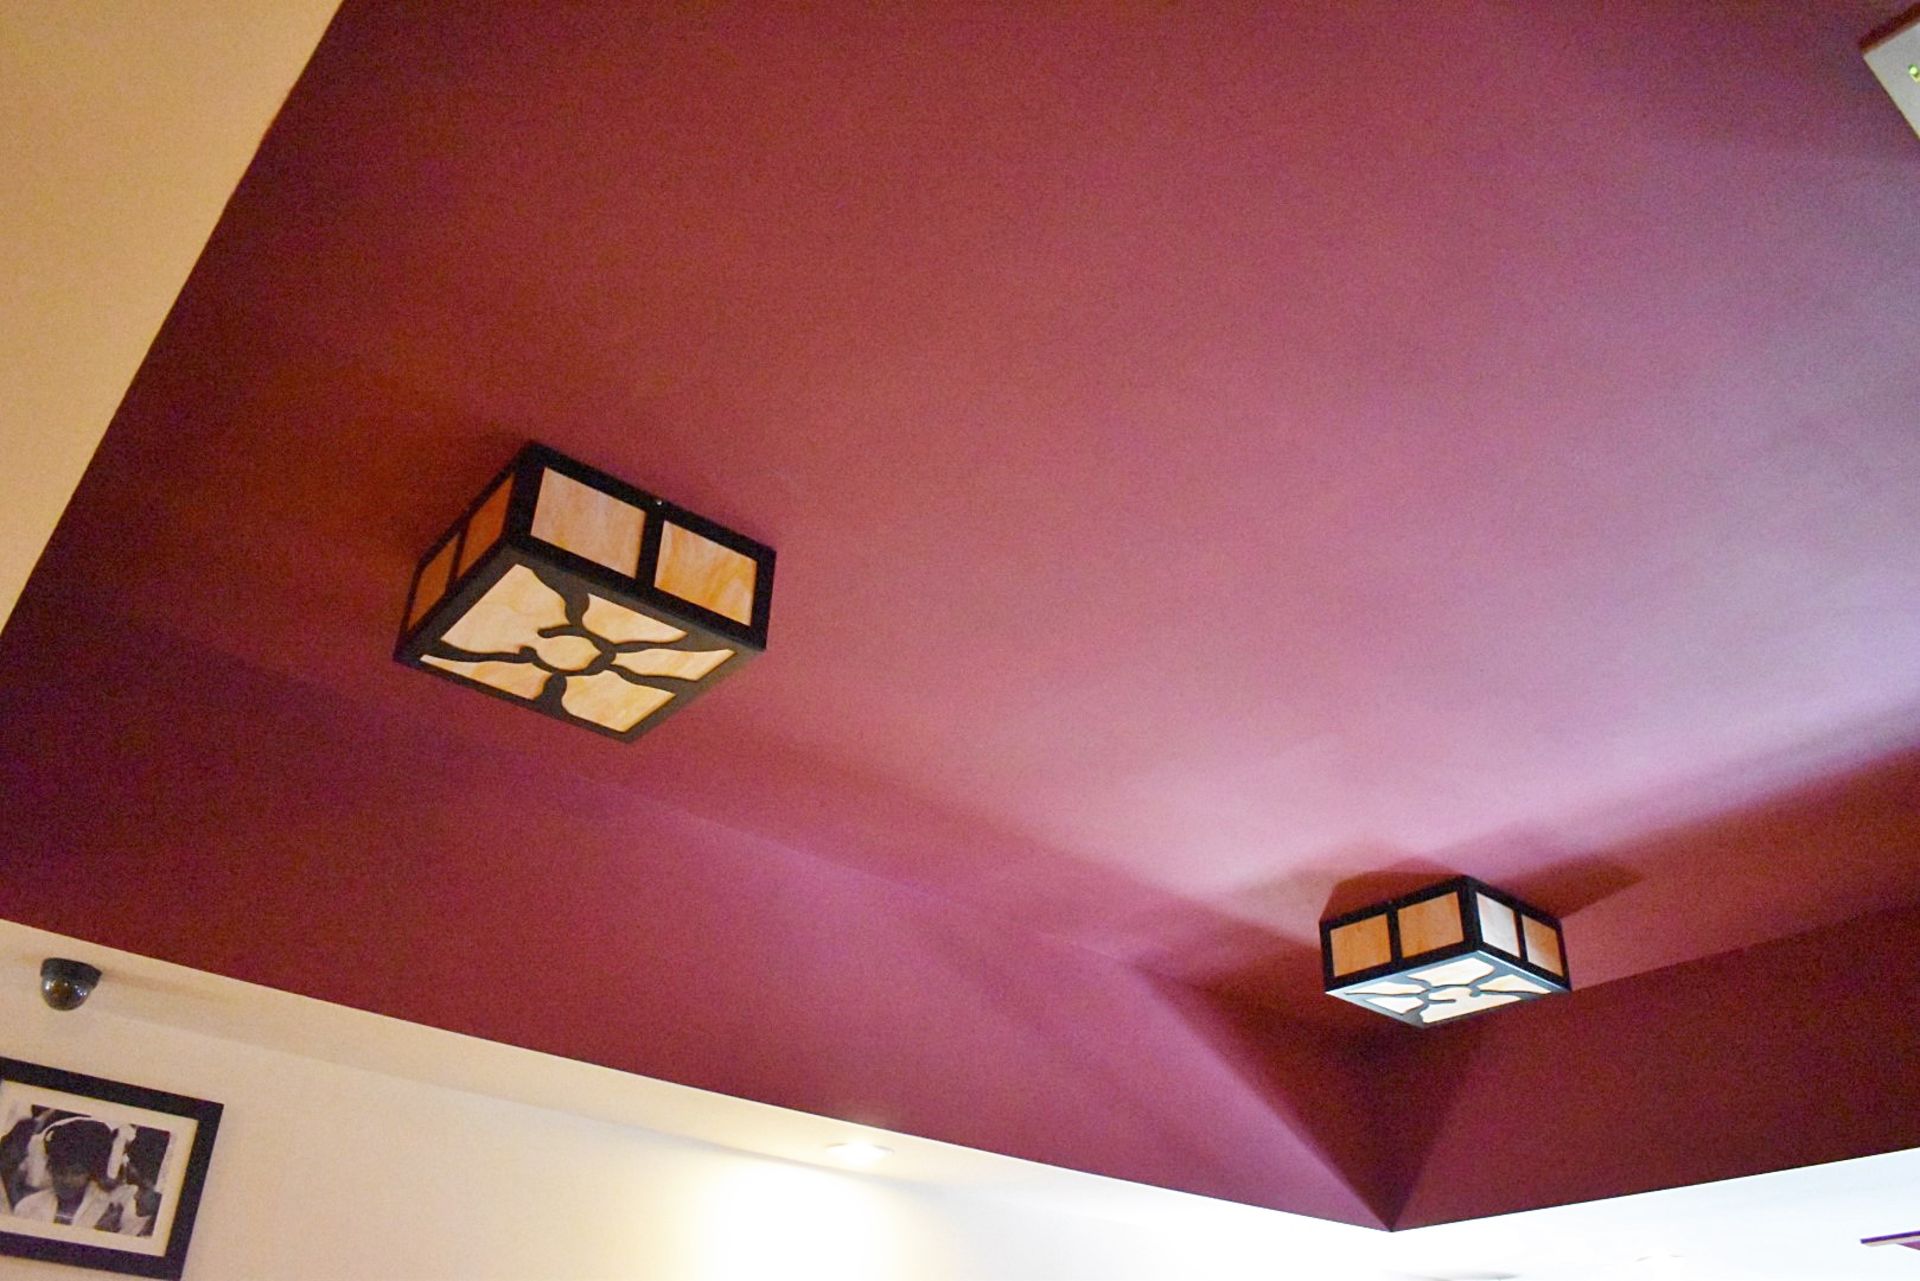 4 x Large Square Ceiling Lights With Artisan Glass Shades - Image 2 of 4